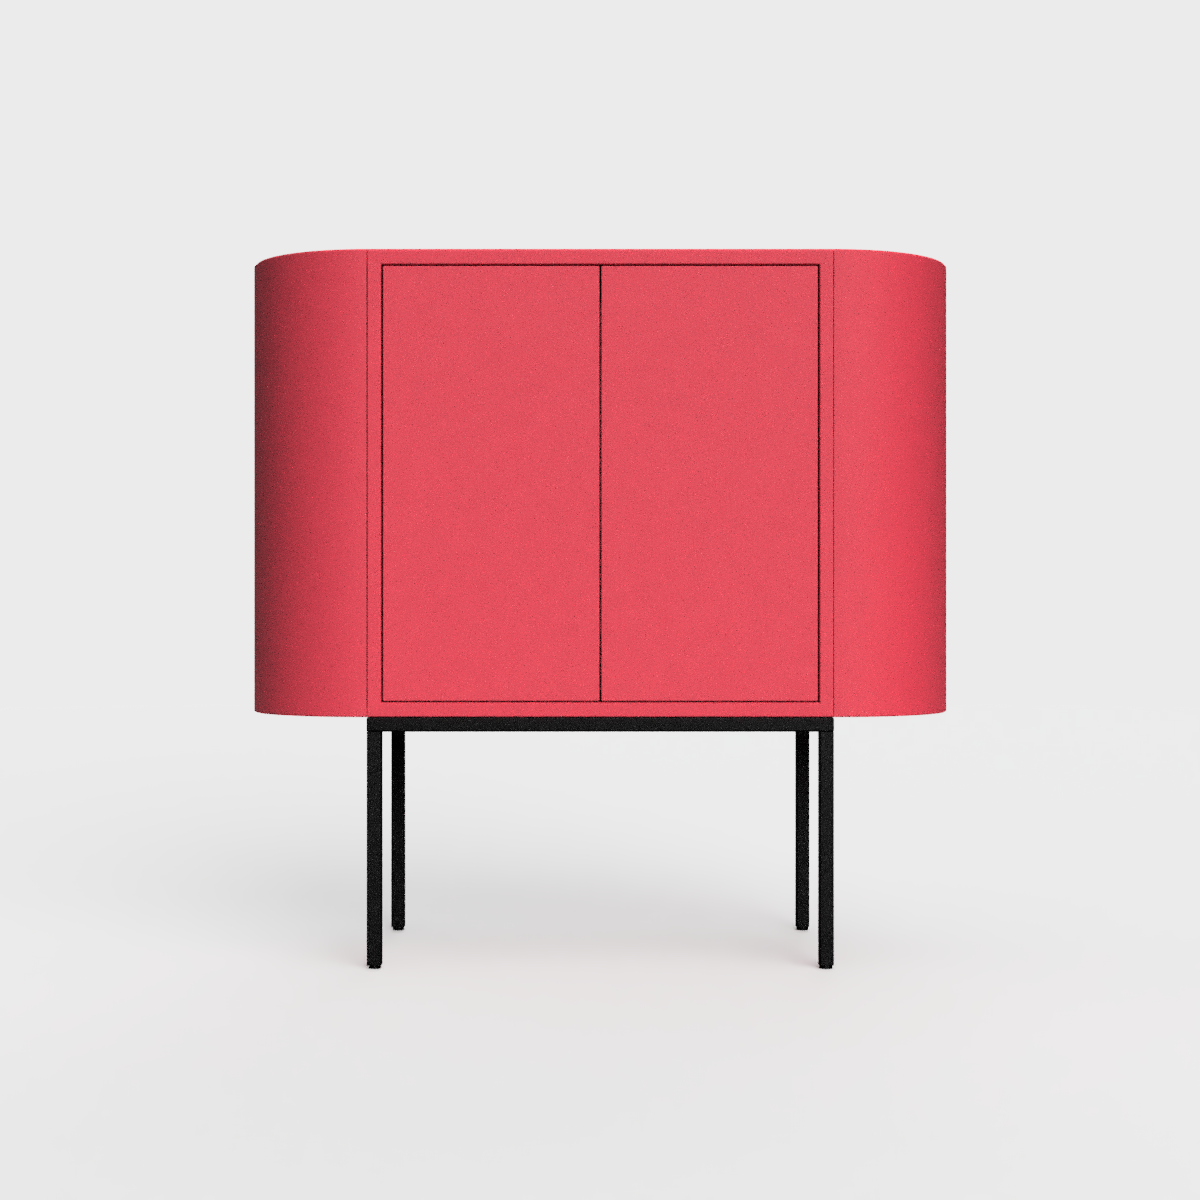 Siena 01 Sideboard in raspberry color, powder-coated steel, elegant and modern piece of furniture for your living room